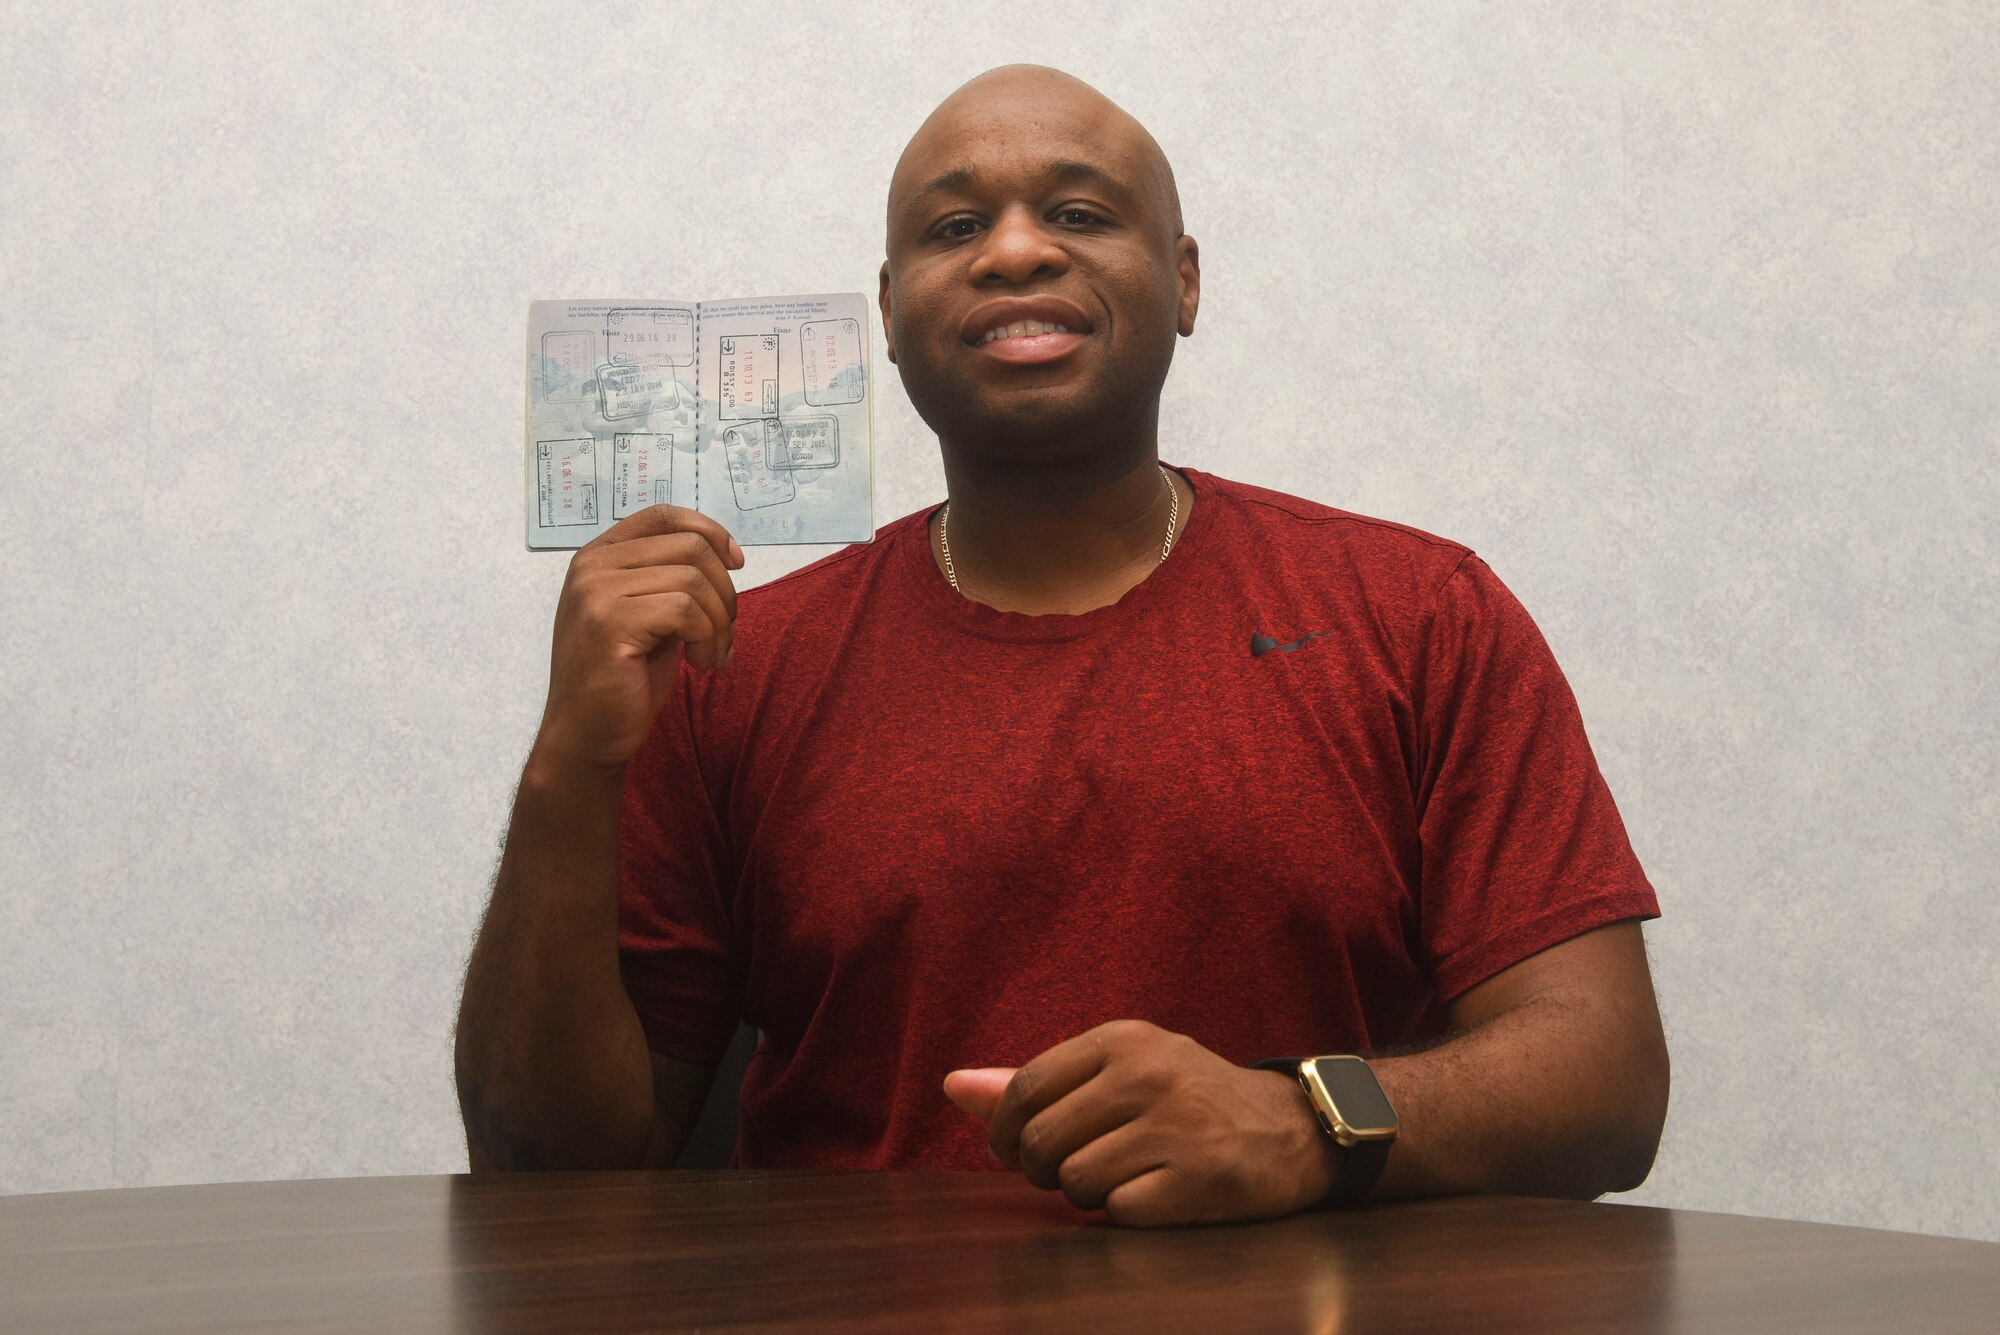 U.S. Air Force Tech. Sgt. Landon Scaife, 100th Air Refueling Wing Equal Opportunity advisor, displays the passport stamps he has collected on his travels at RAF Mildenhall, England, Aug. 6, 2019. Scaife has visited more than 20 countries during his two assignments here. (U.S. Air Force photo by Airman 1st Class Joseph Barron)